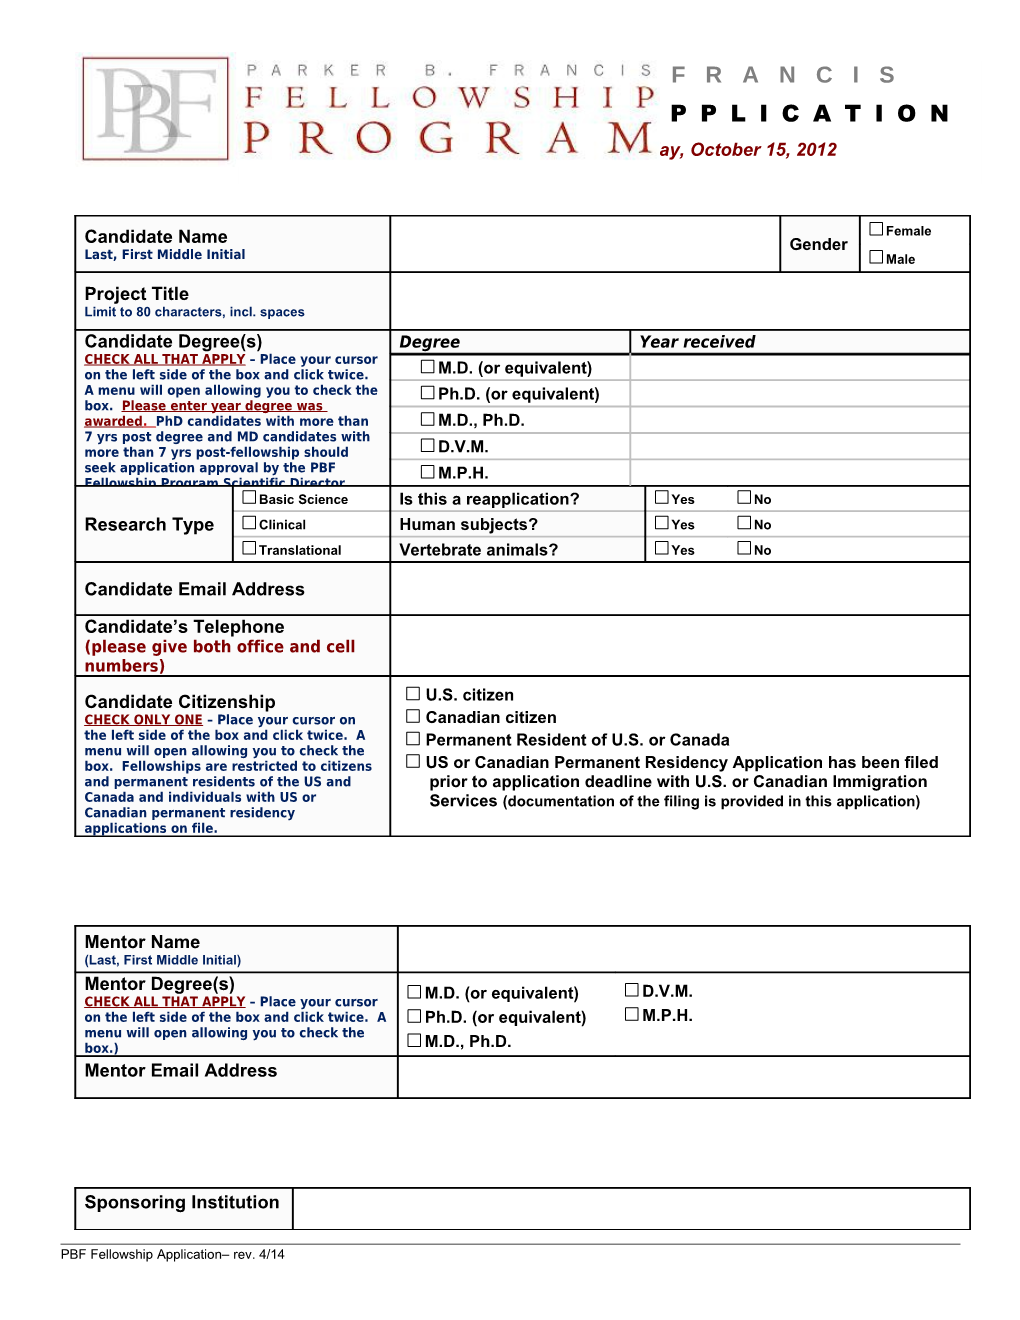 PHS 398, Fp1 (Rev. 9/04), Face Page, Form Page 1